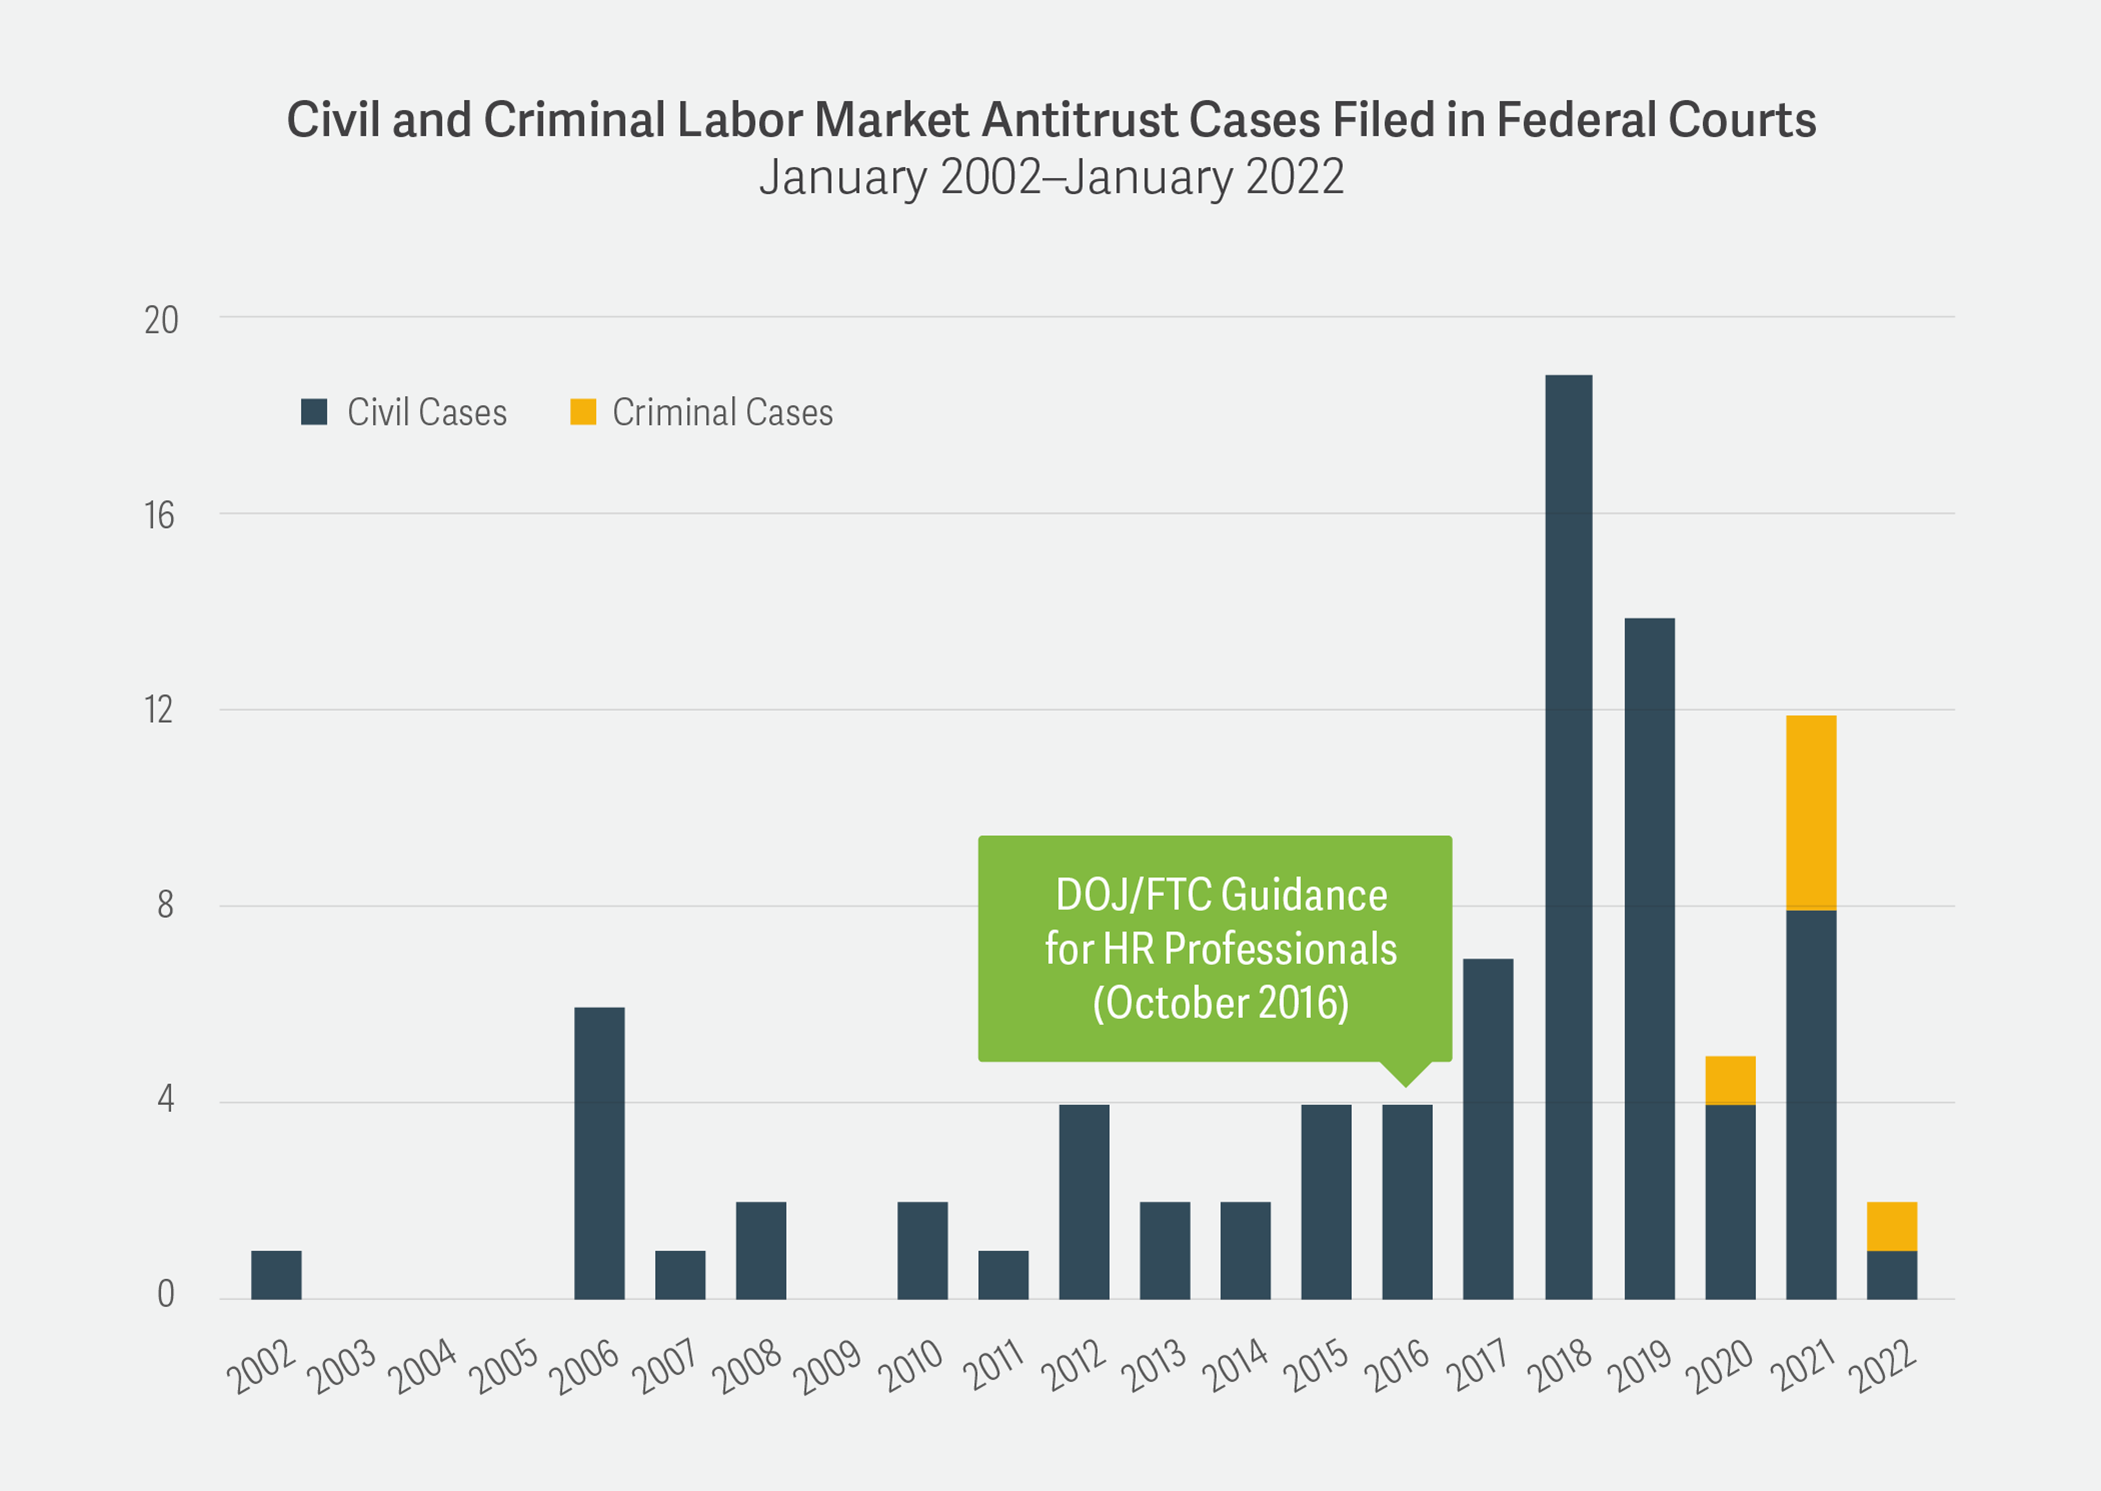 Civil and Criminal Labor Market Antitrust Cases Filed in Federal Courts